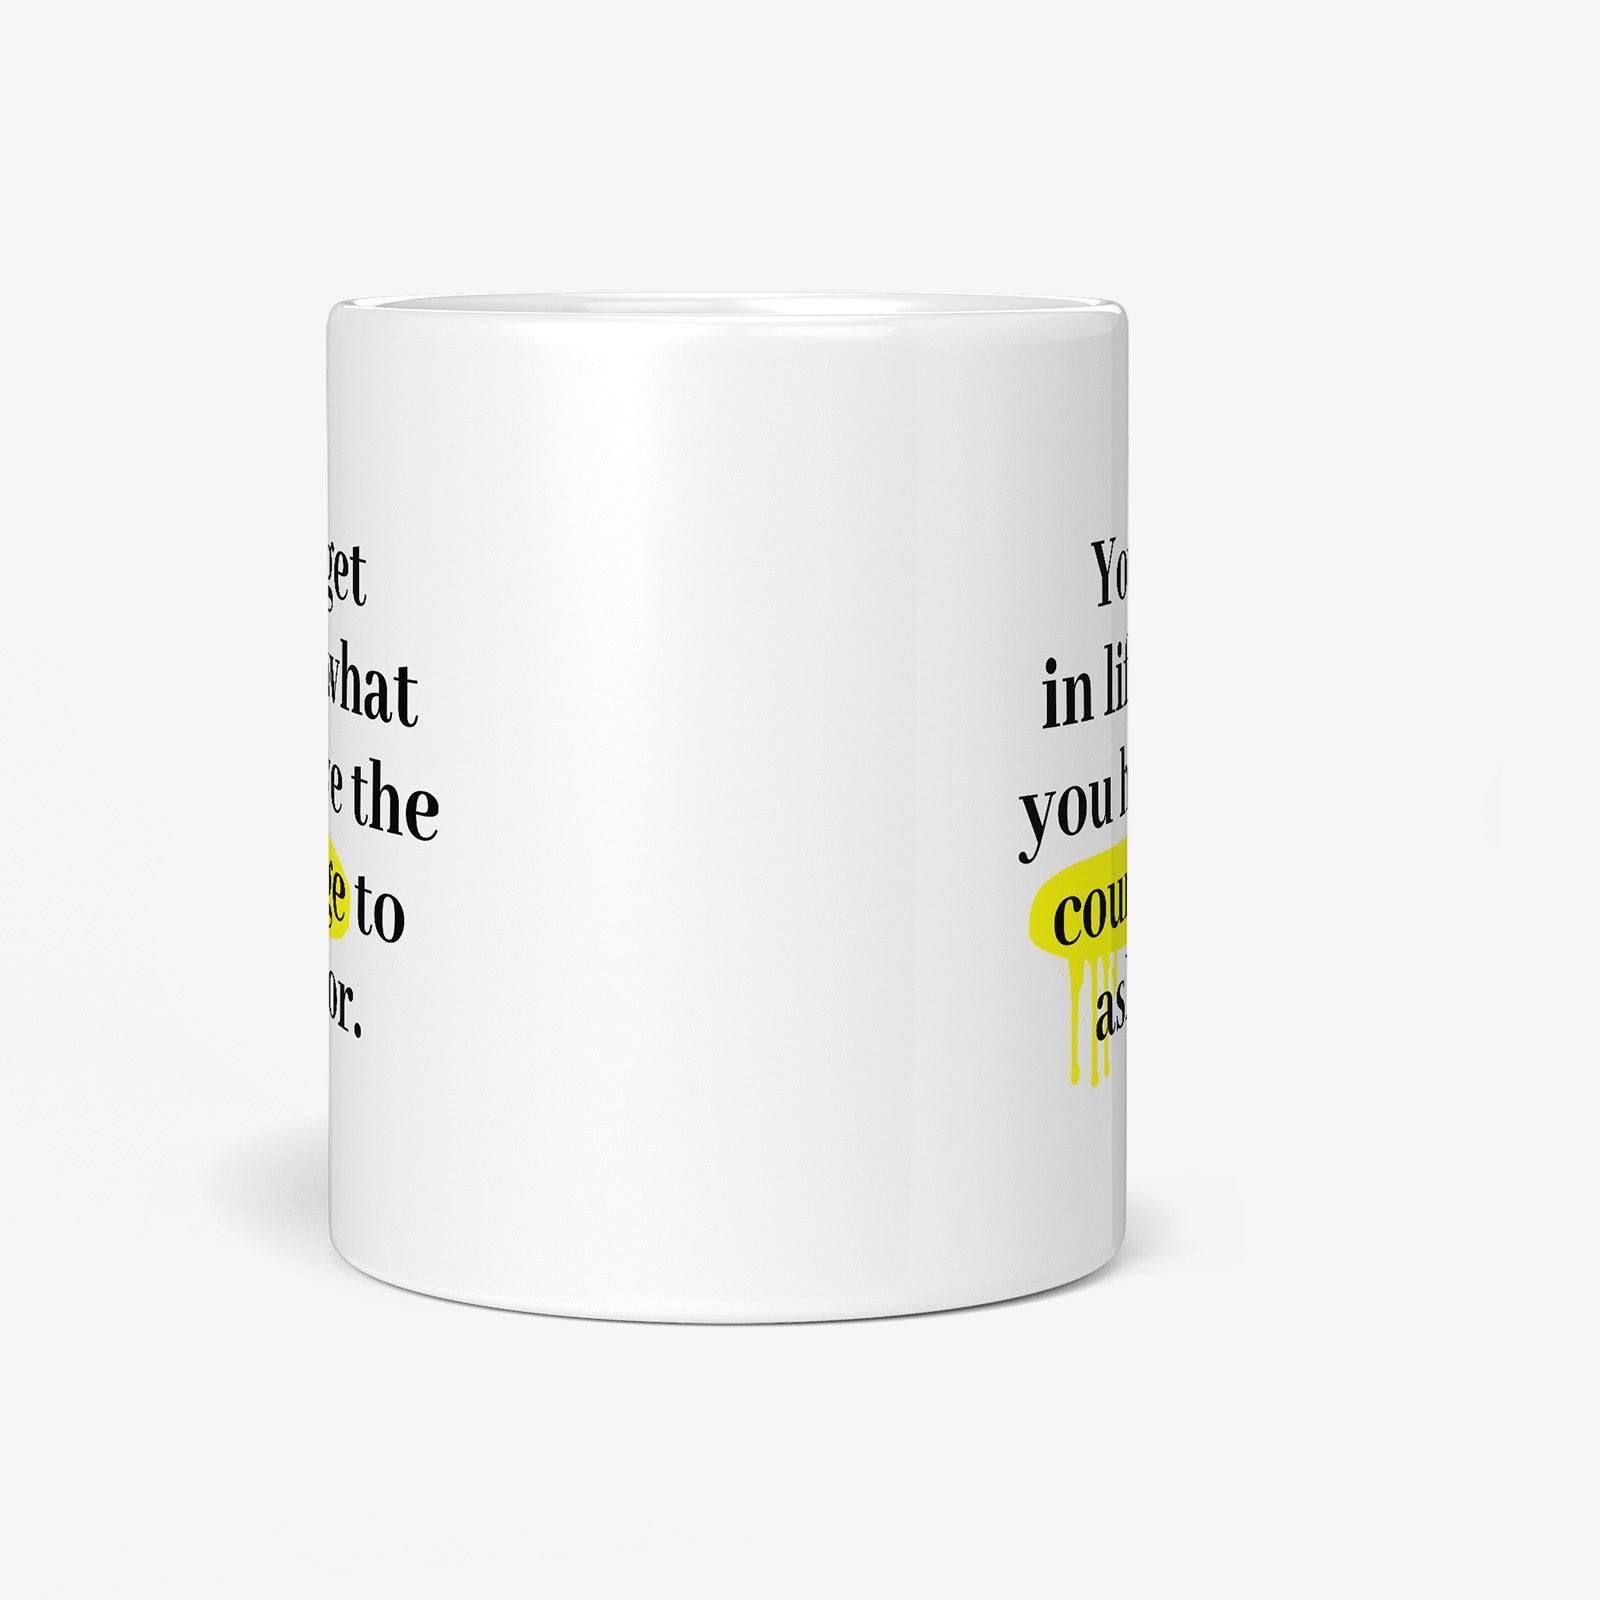 Be inspired by Oprah Winfrey's famous quote, "You get in life what you have the courage to ask for" on this white and glossy 11oz coffee mug with a front view.